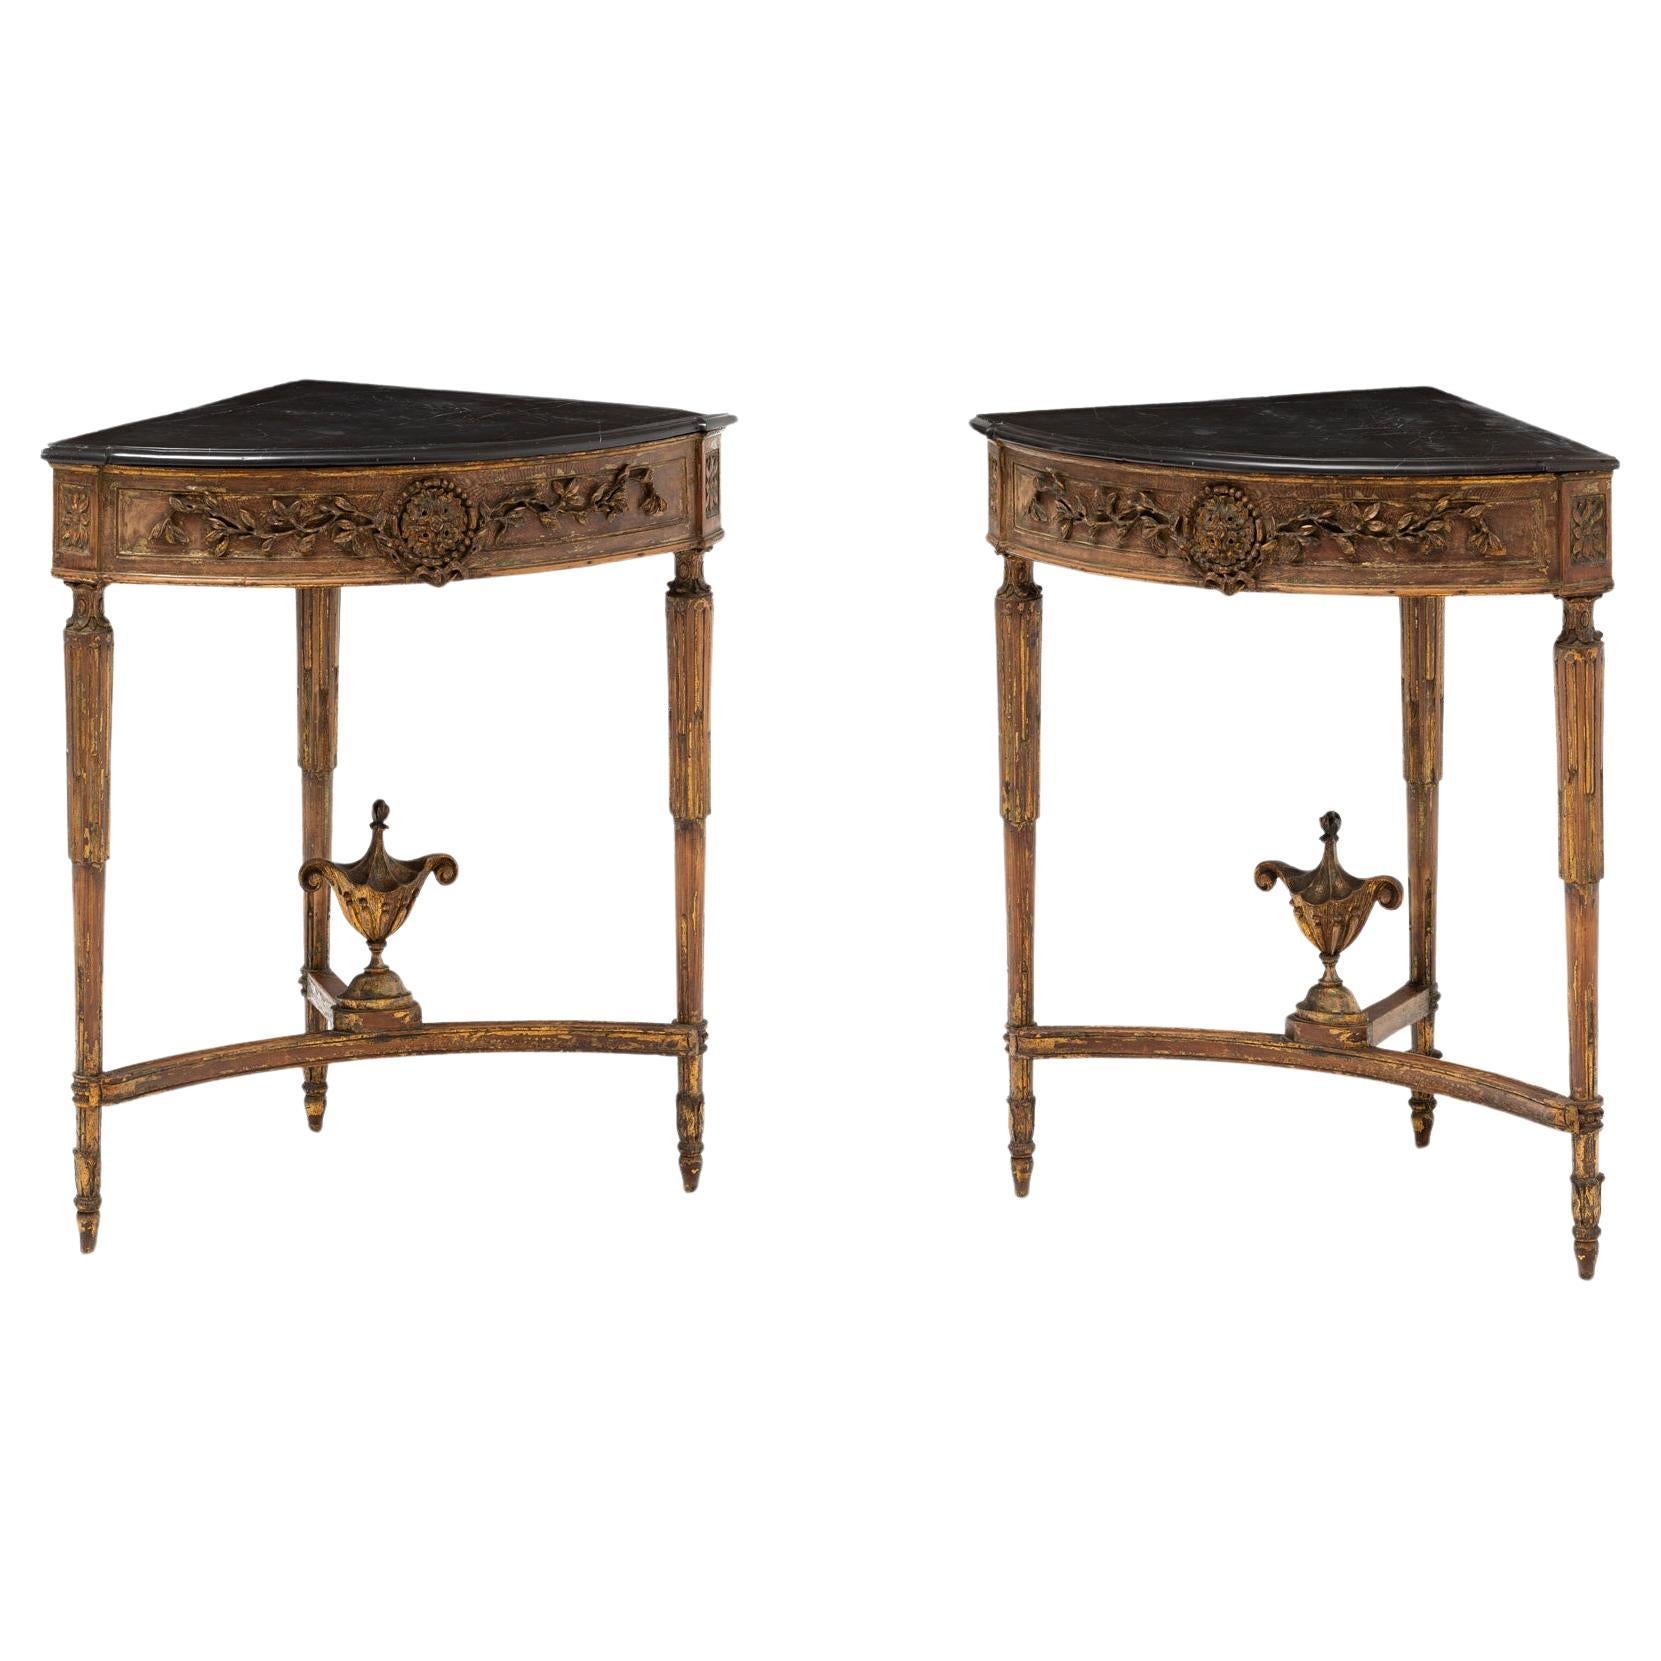 Pair of Louis XVI Style Corner Tables, Portugal 19th Century by Lucien Donnat